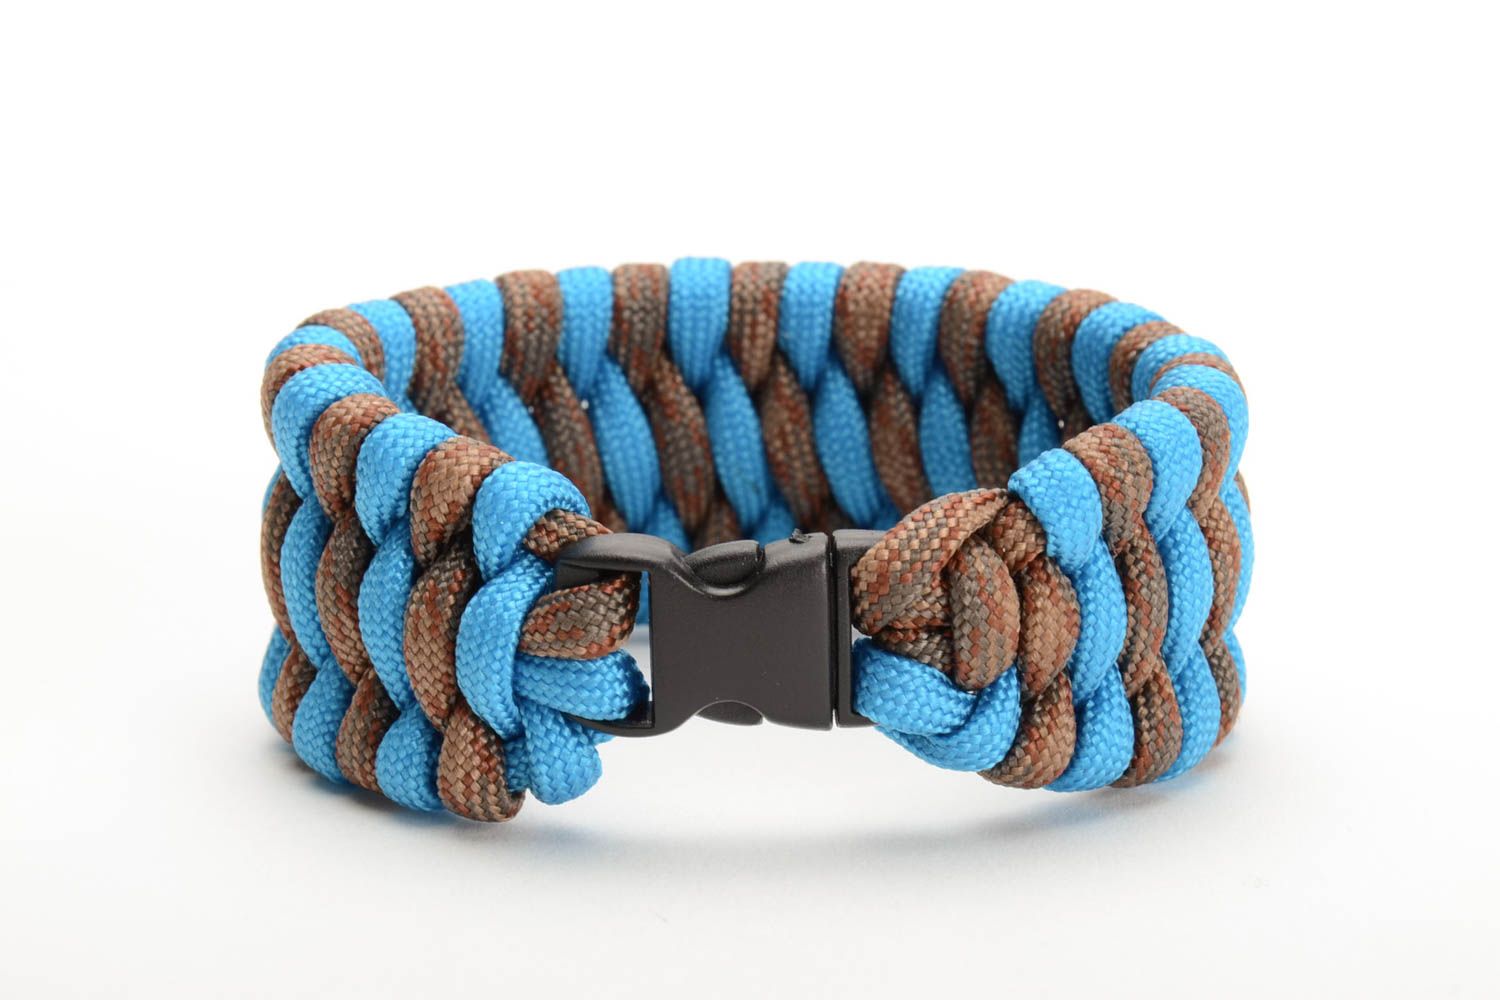 Unusual blue and gray handmade paracord wrist bracelet with fastener photo 3